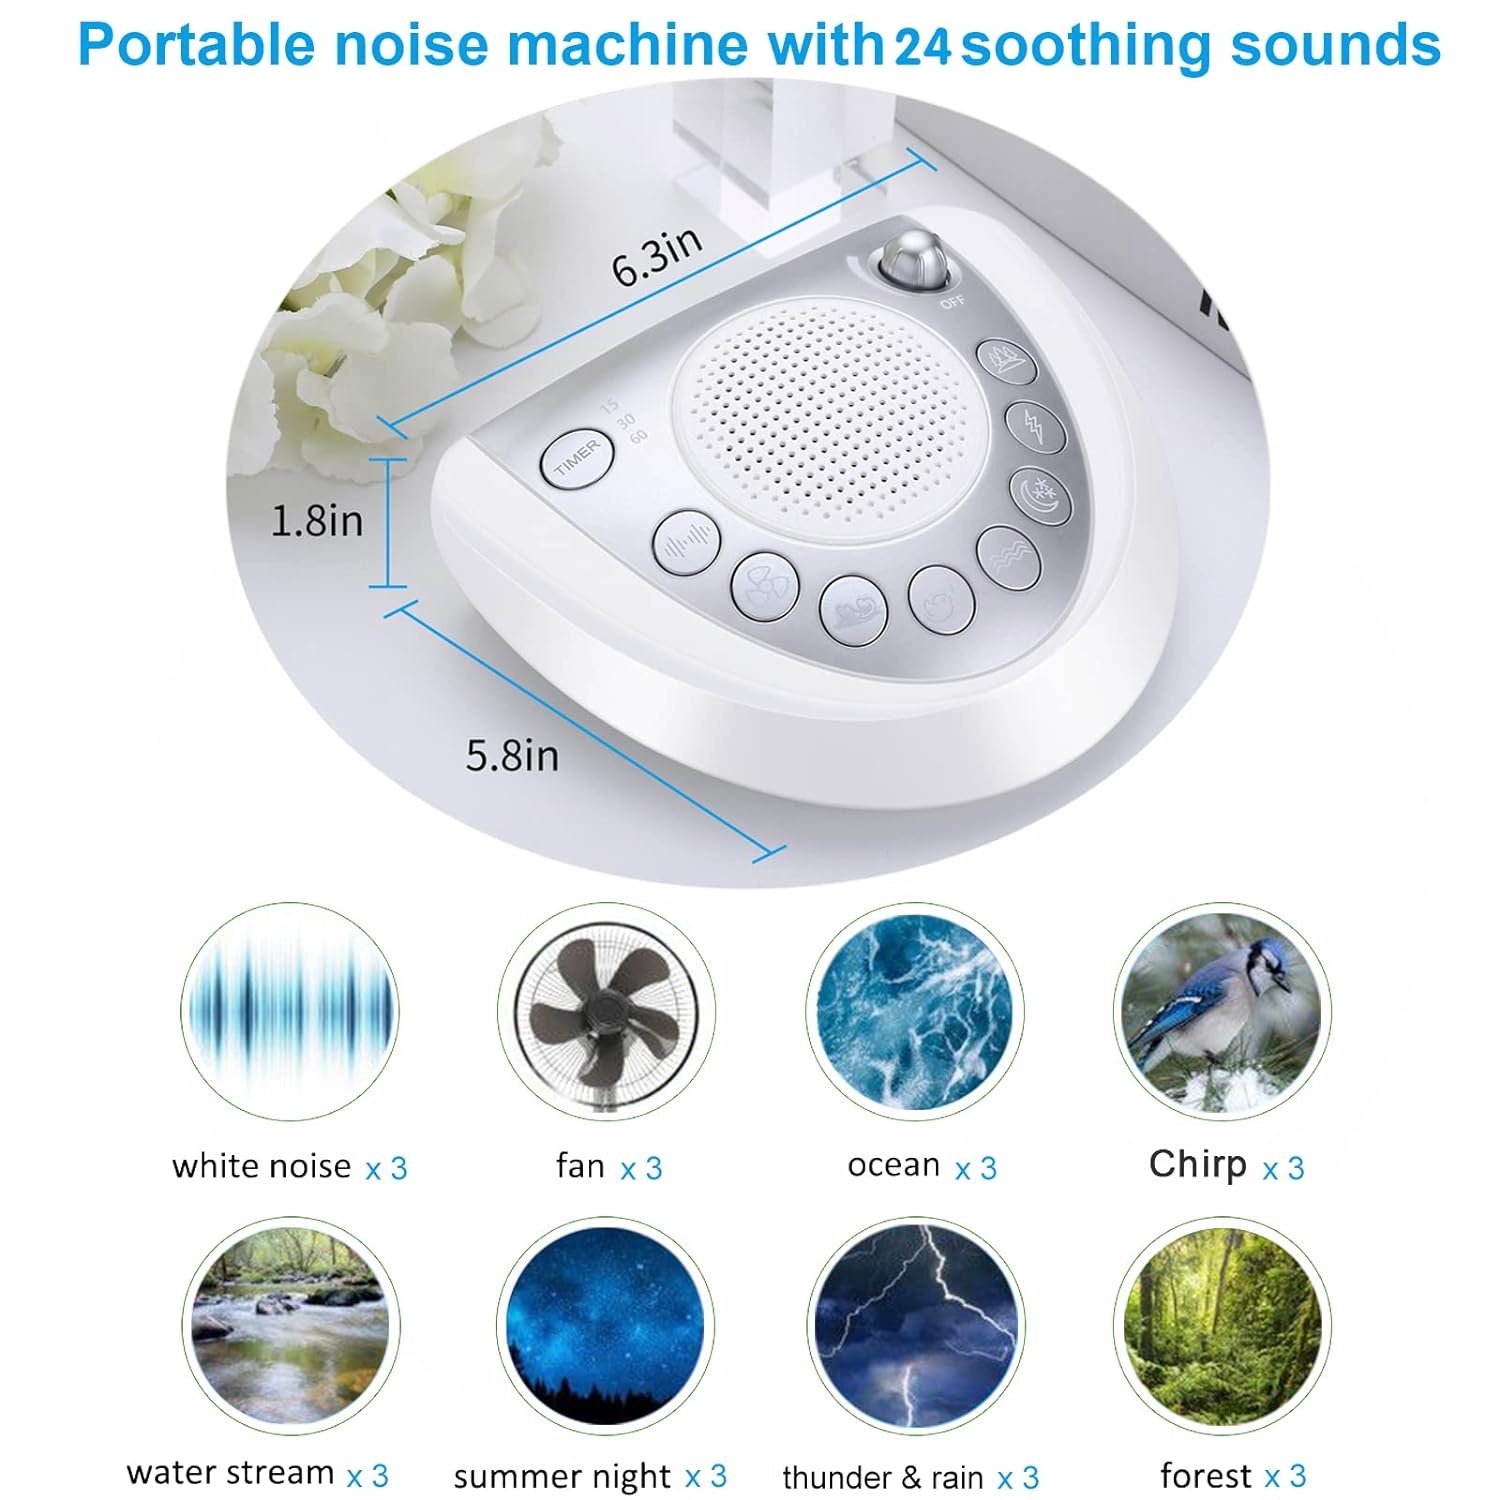 White Noise Sound Machine - Raynic Sleep Therapy Portable Spa Relaxation Machine with 8 Natural Soothing Sounds, Sleep Timer, Headphone Jack, USB Port for Baby, Kids, Adults, Traveler, Office, bedroom